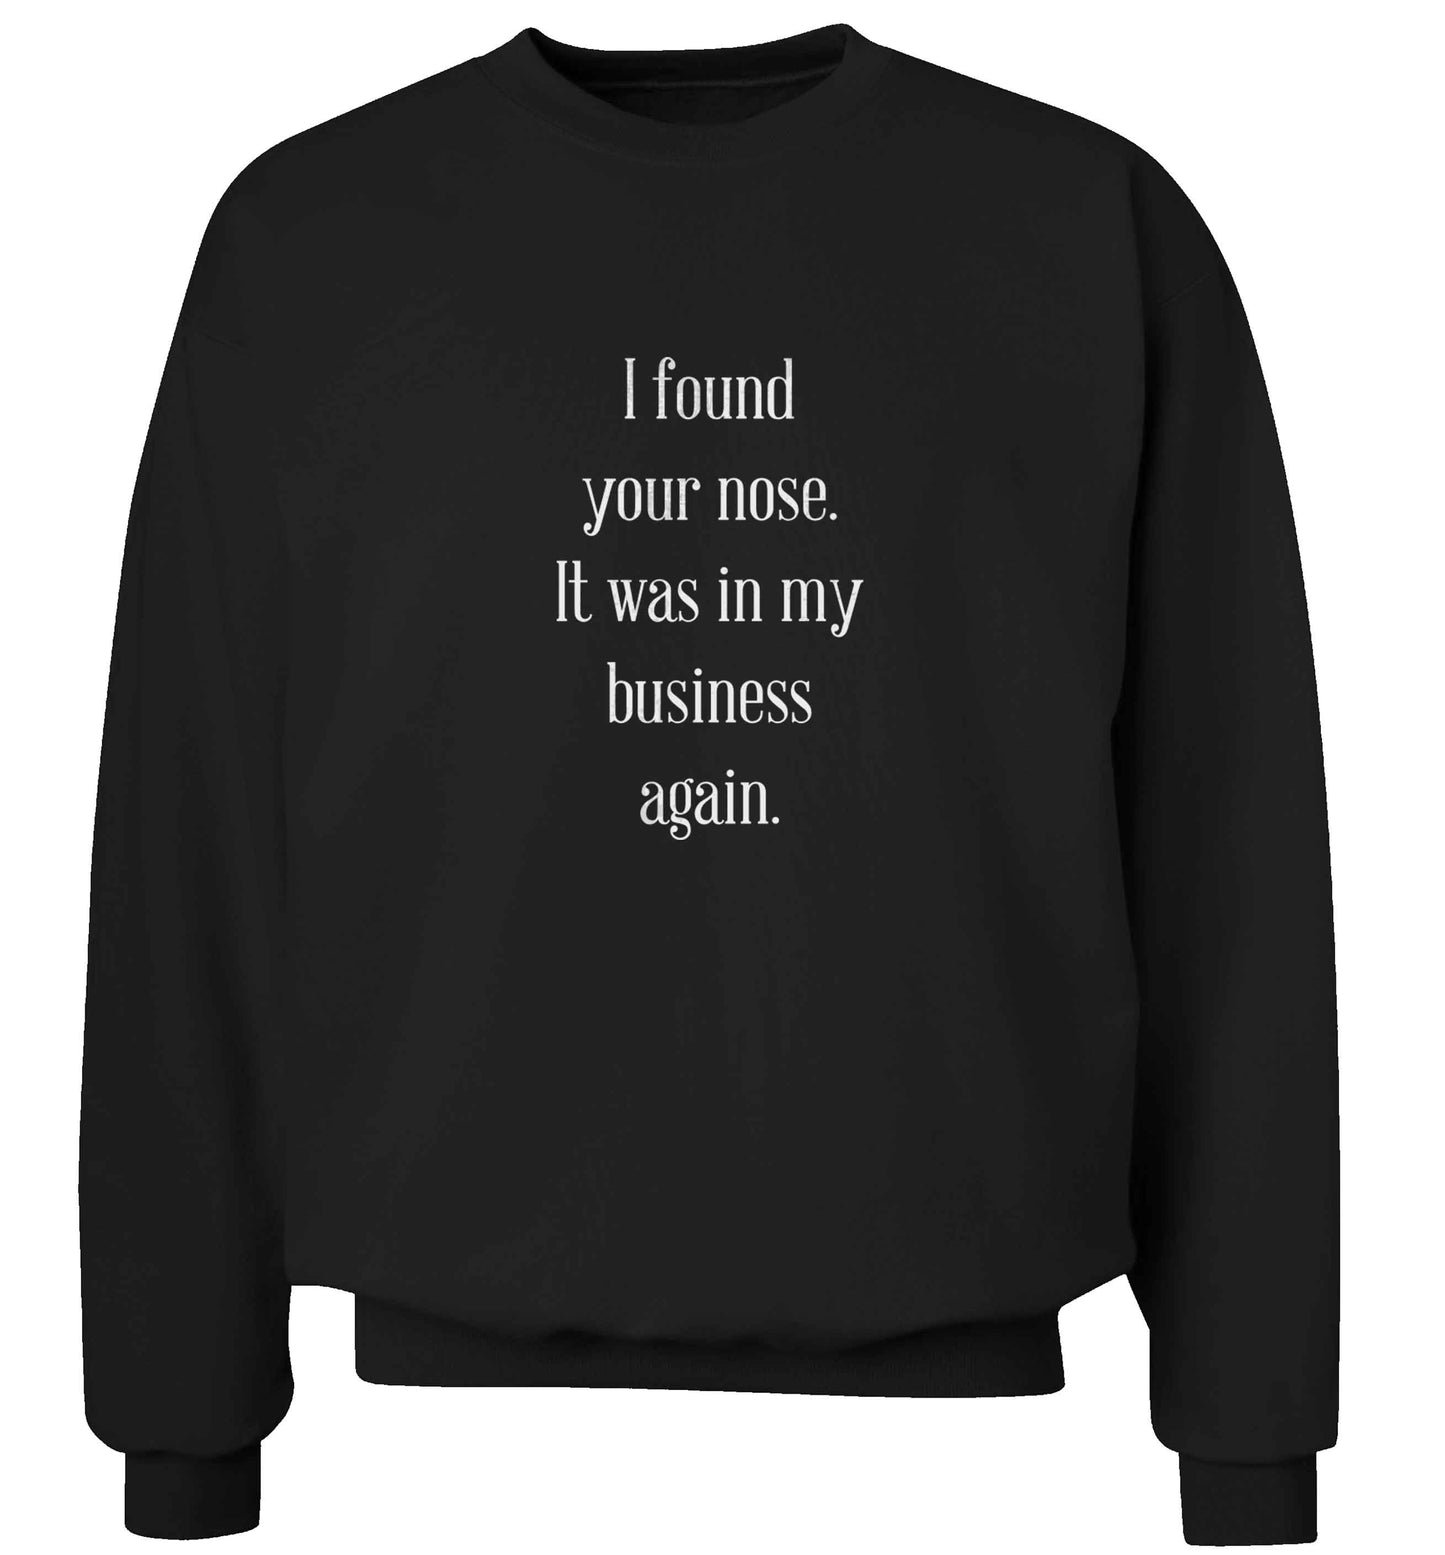 I found your nose it was in my business again adult's unisex black sweater 2XL